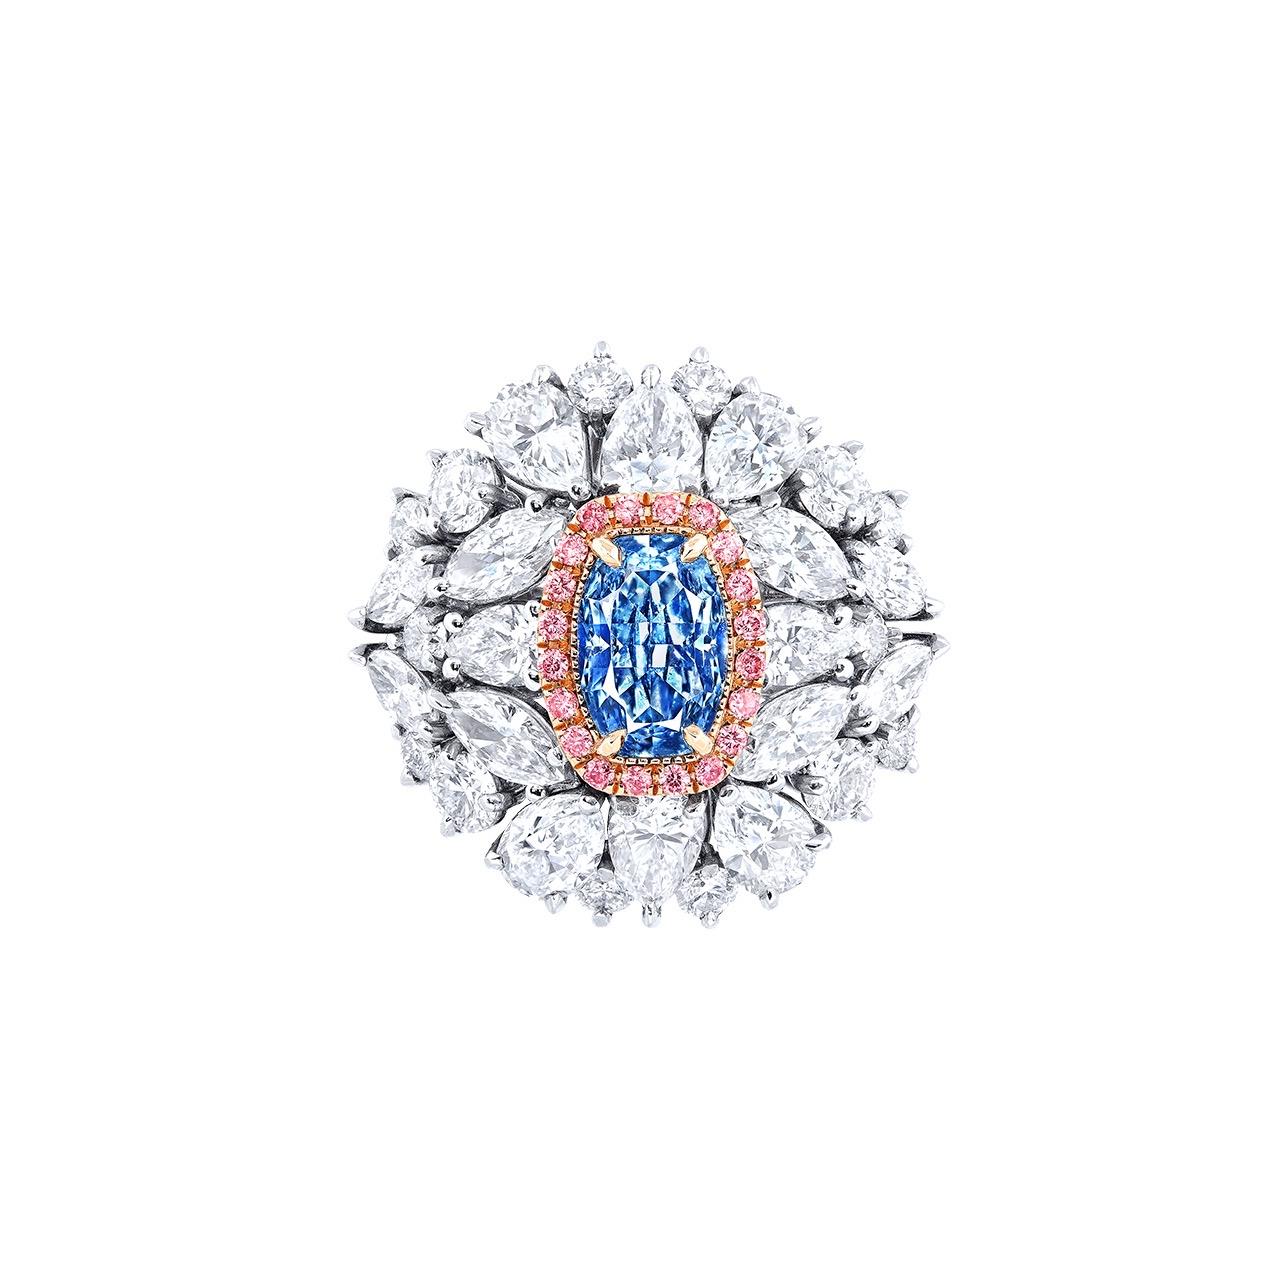 From the museum vault at Emilio Jewelry, located on New York's iconic Fifth Avenue,
Center Stone: 1.20 carat + Gia certified natural Fancy Intense pure Blue VS1 CUSHION
Matching: White diamonds total about 4.30 carats, pink diamonds total about 0.18